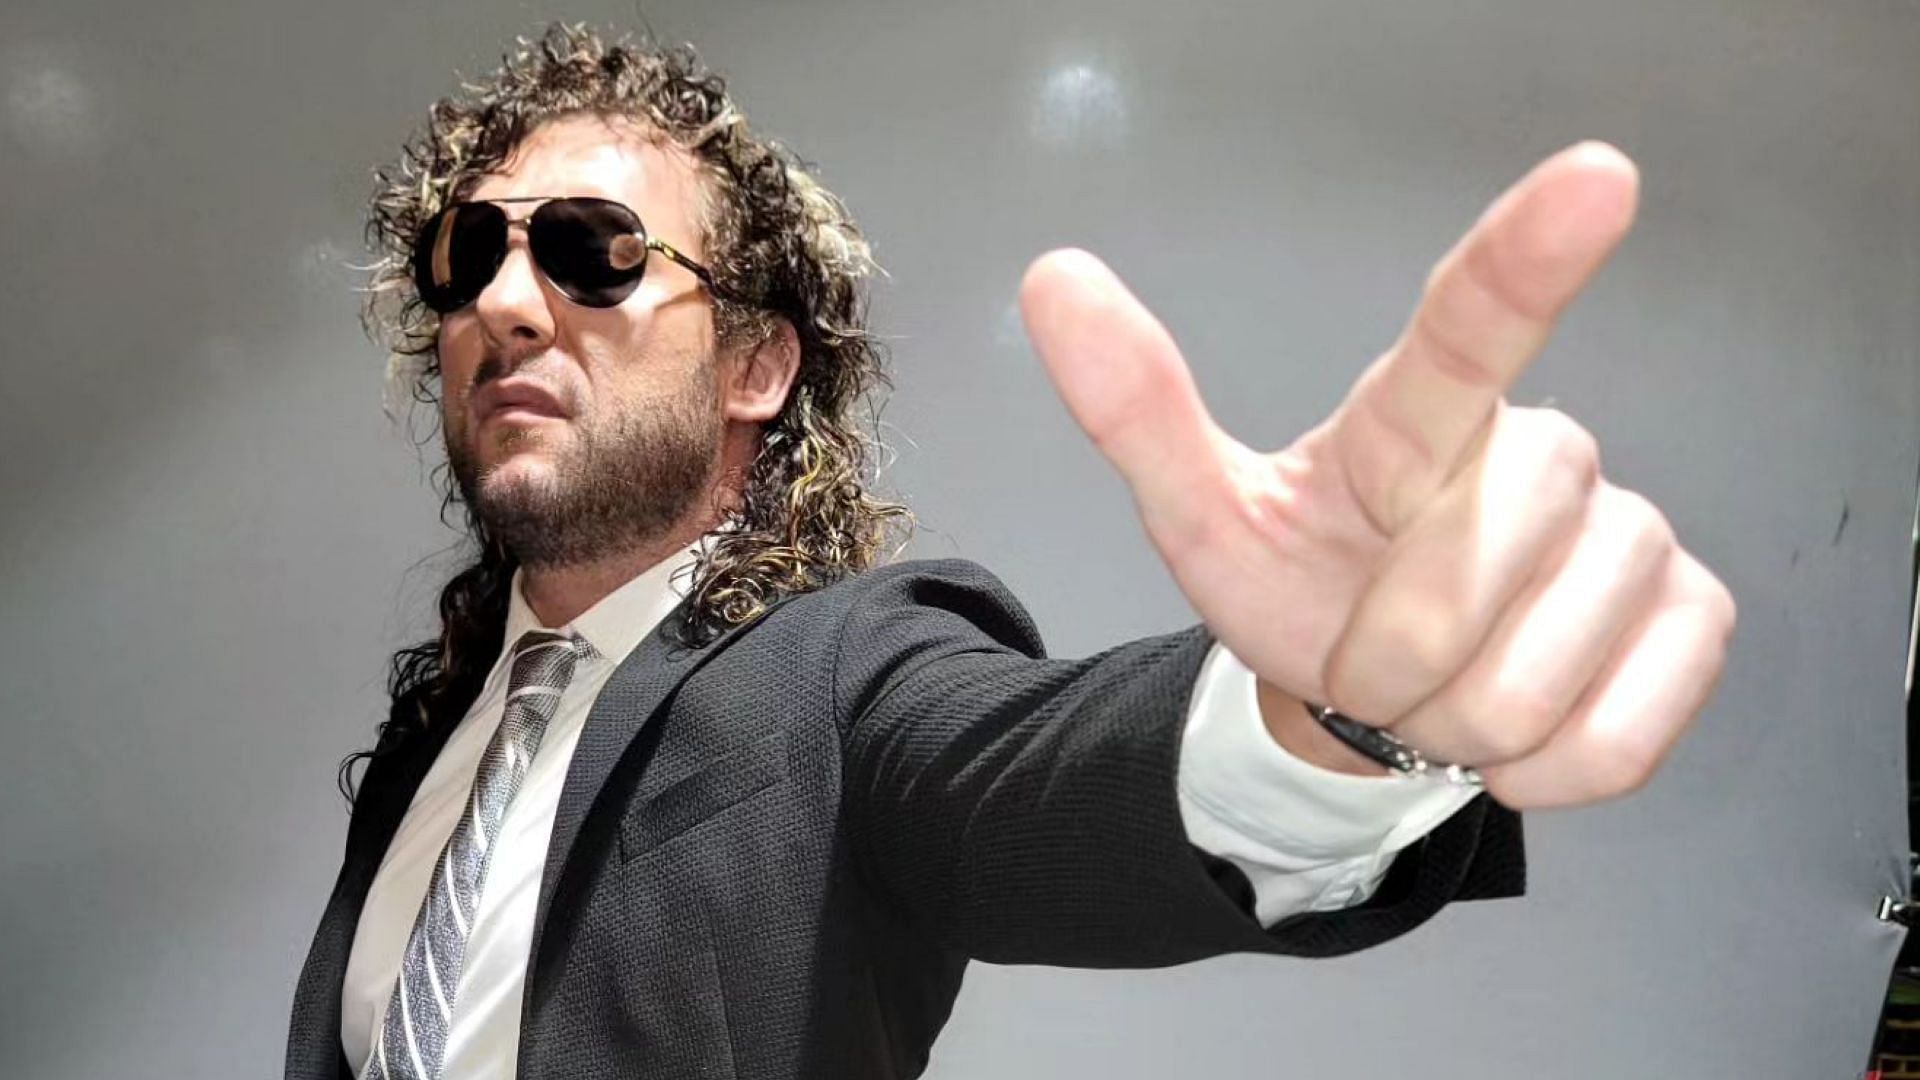 Kenny Omega poses for photo shoot backstage at AEW Dynamite